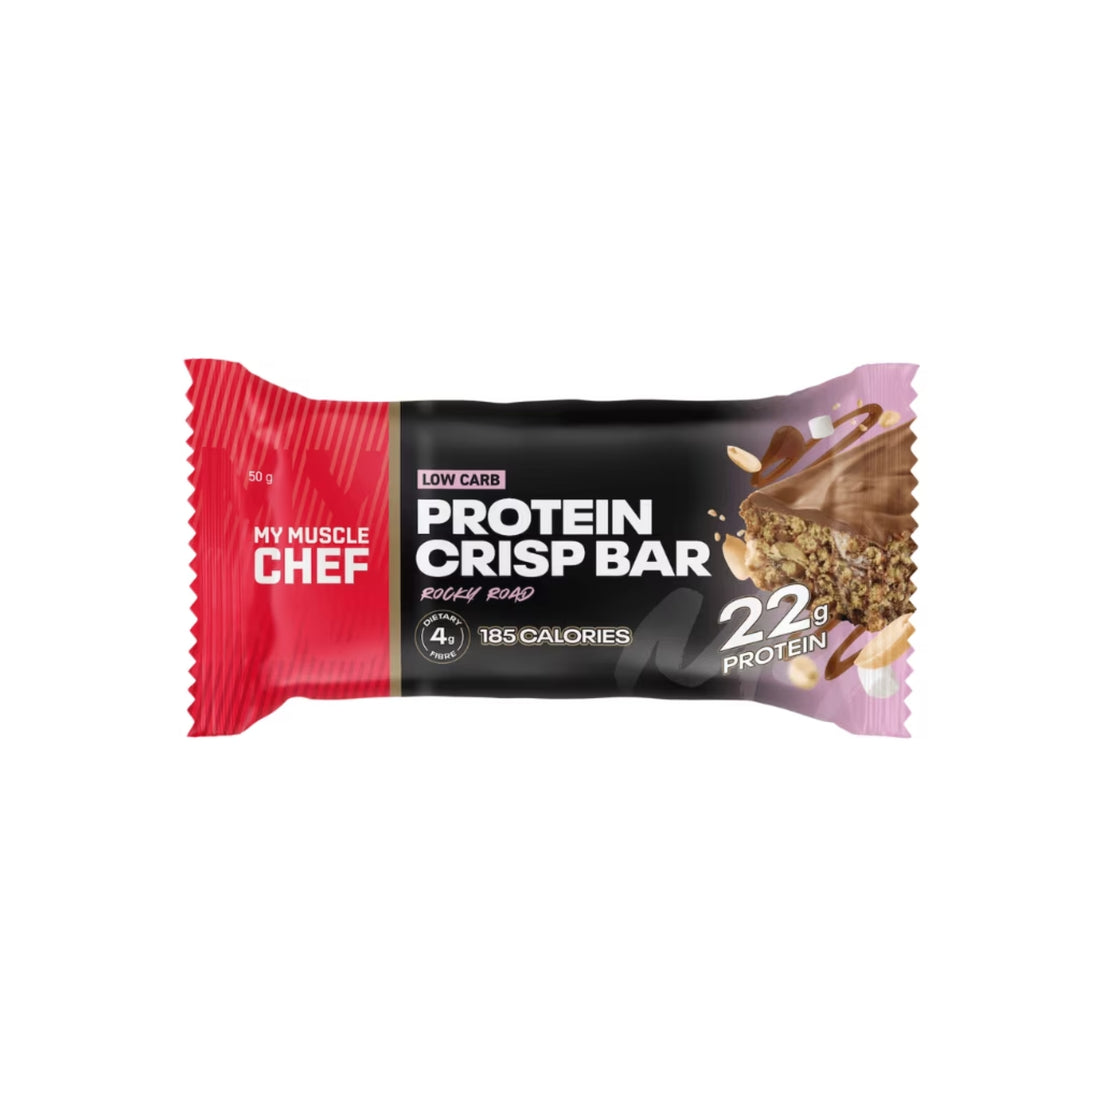 My Muscle Chef Protein Crisp Bar - Rocky Road